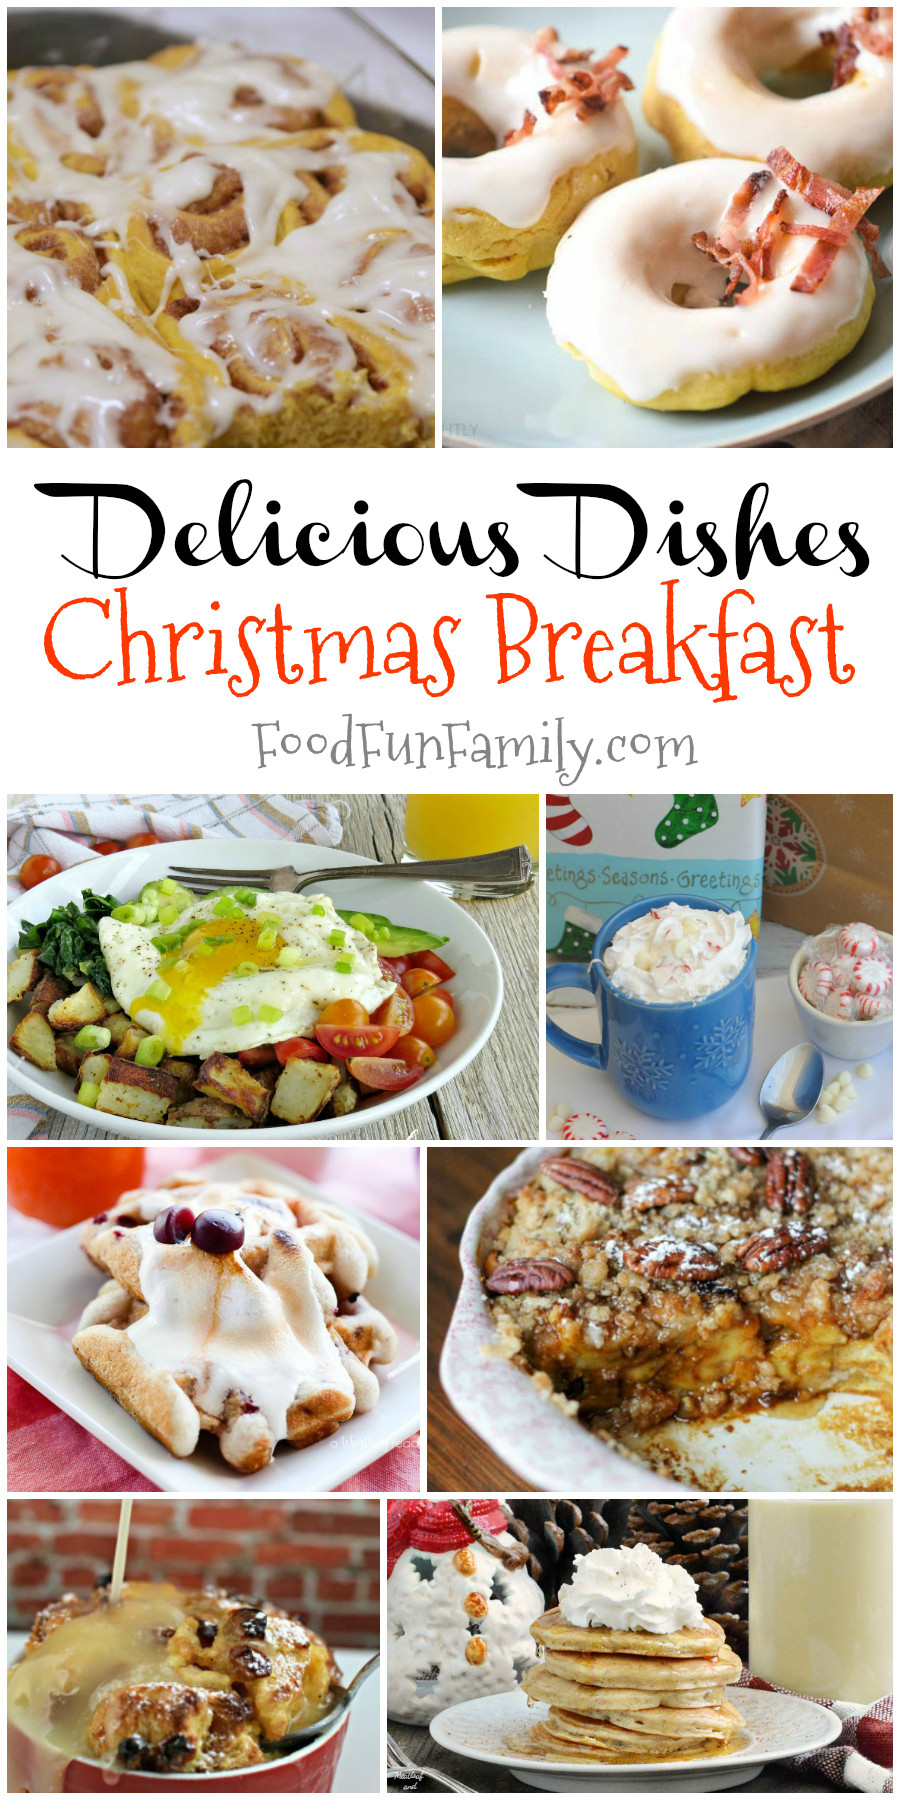 Christmas Breakfast Party Ideas
 Christmas Breakfast Recipes – Delicious Dishes Recipe